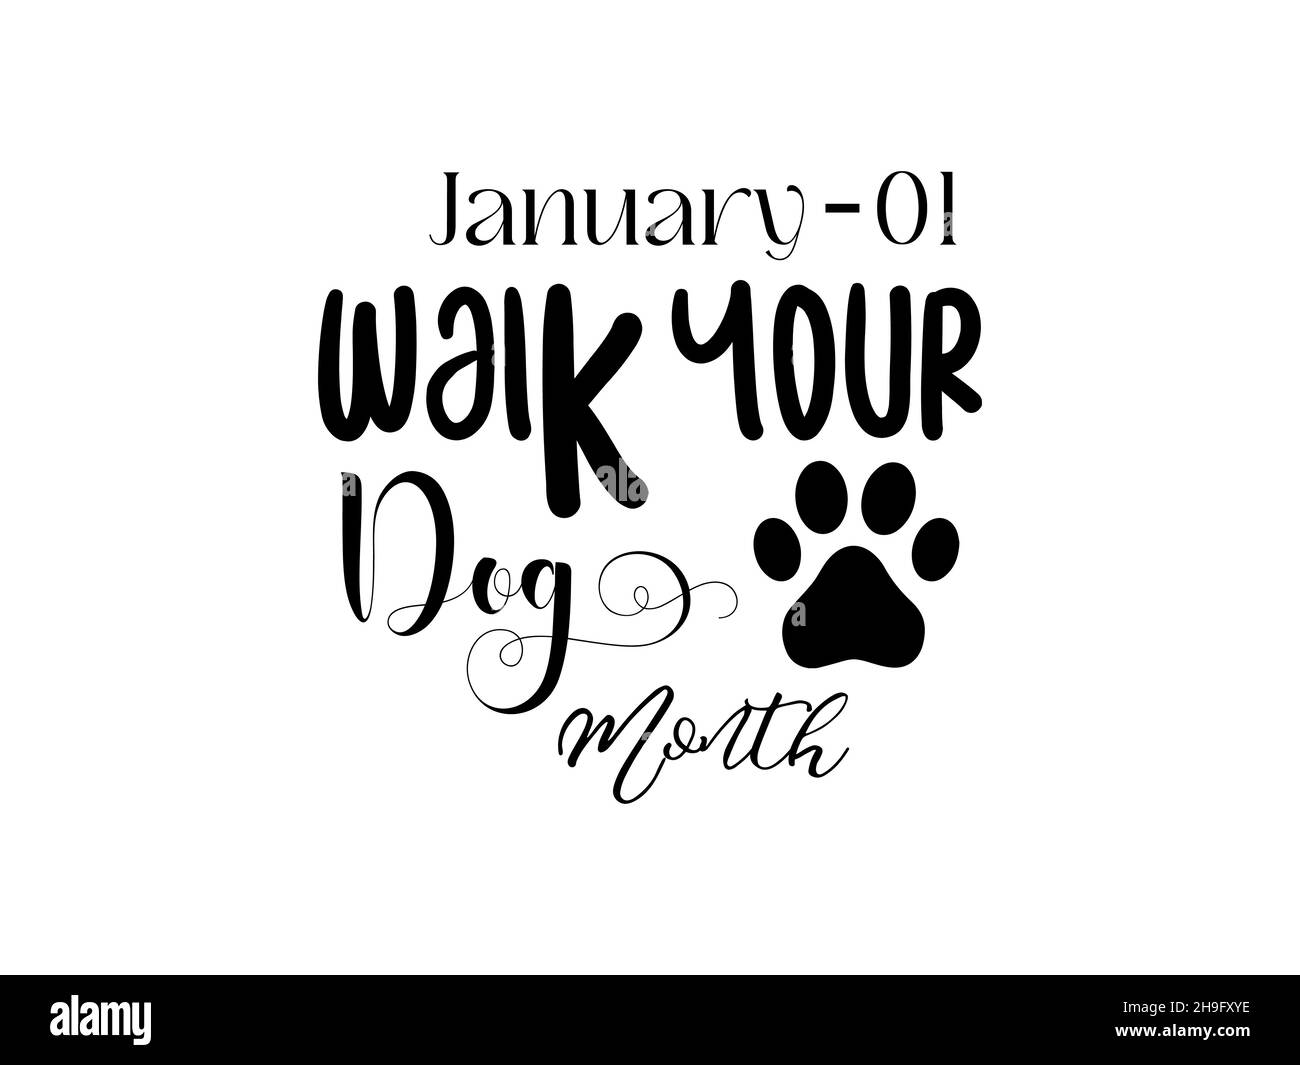 January 01 - Calligraphy style hand lettering design for Walk Your Dog Month. Creative vector illustration design for banner, poster, tshirt, card. Stock Vector